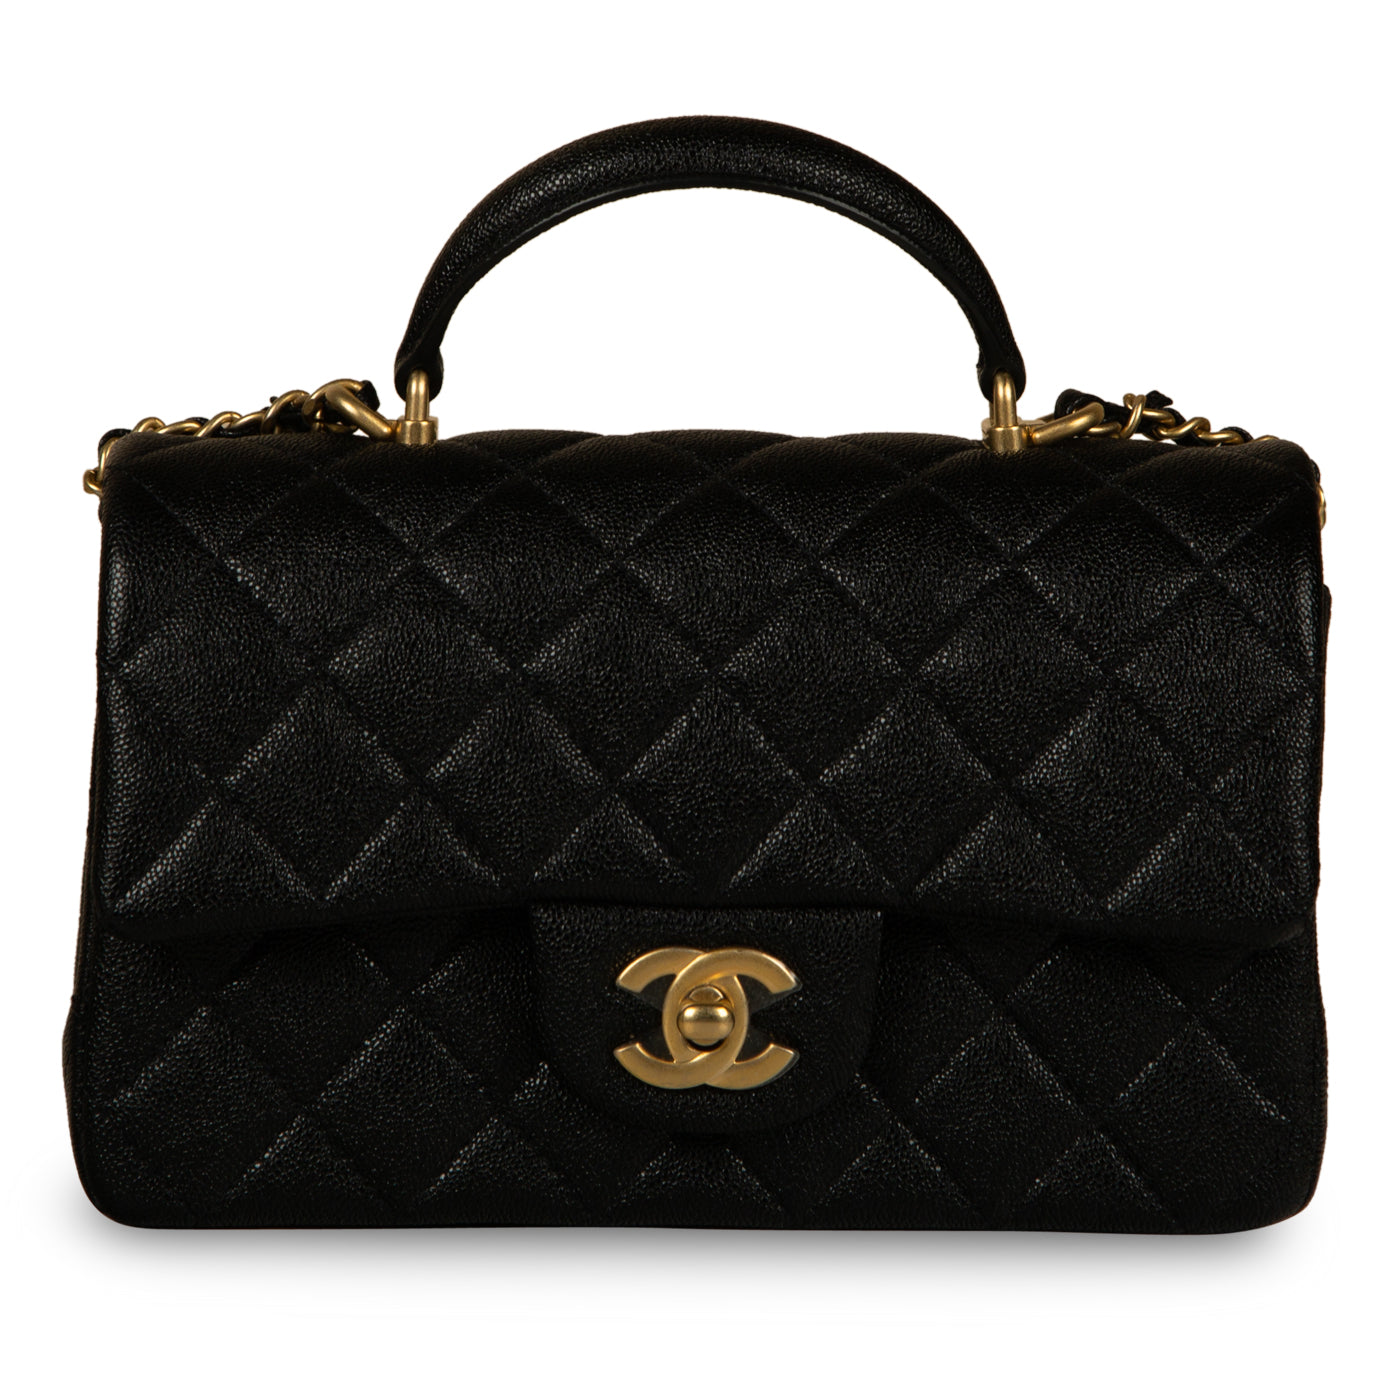 SHOP - CHANEL - Page 3 - VLuxeStyle